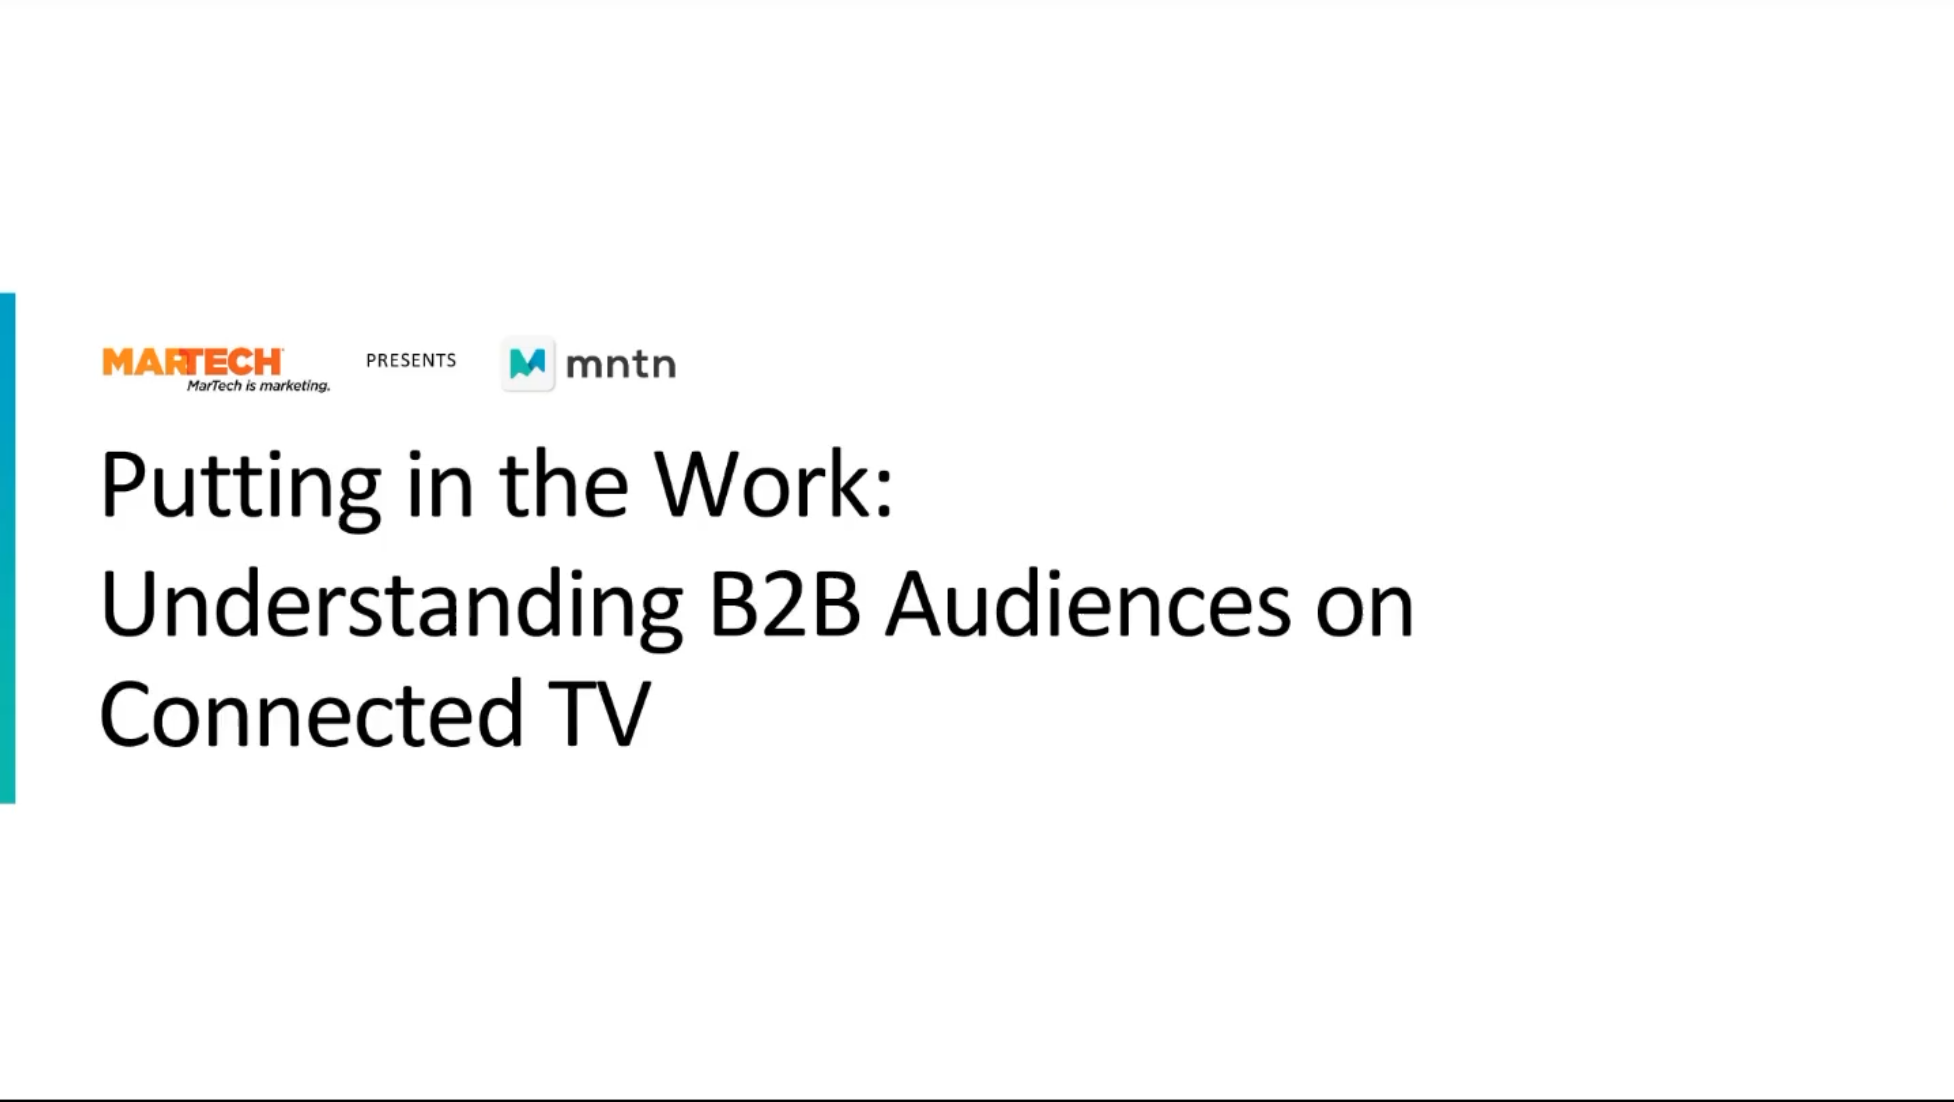 Putting in the Work: Understanding B2B Audiences on Connected TV